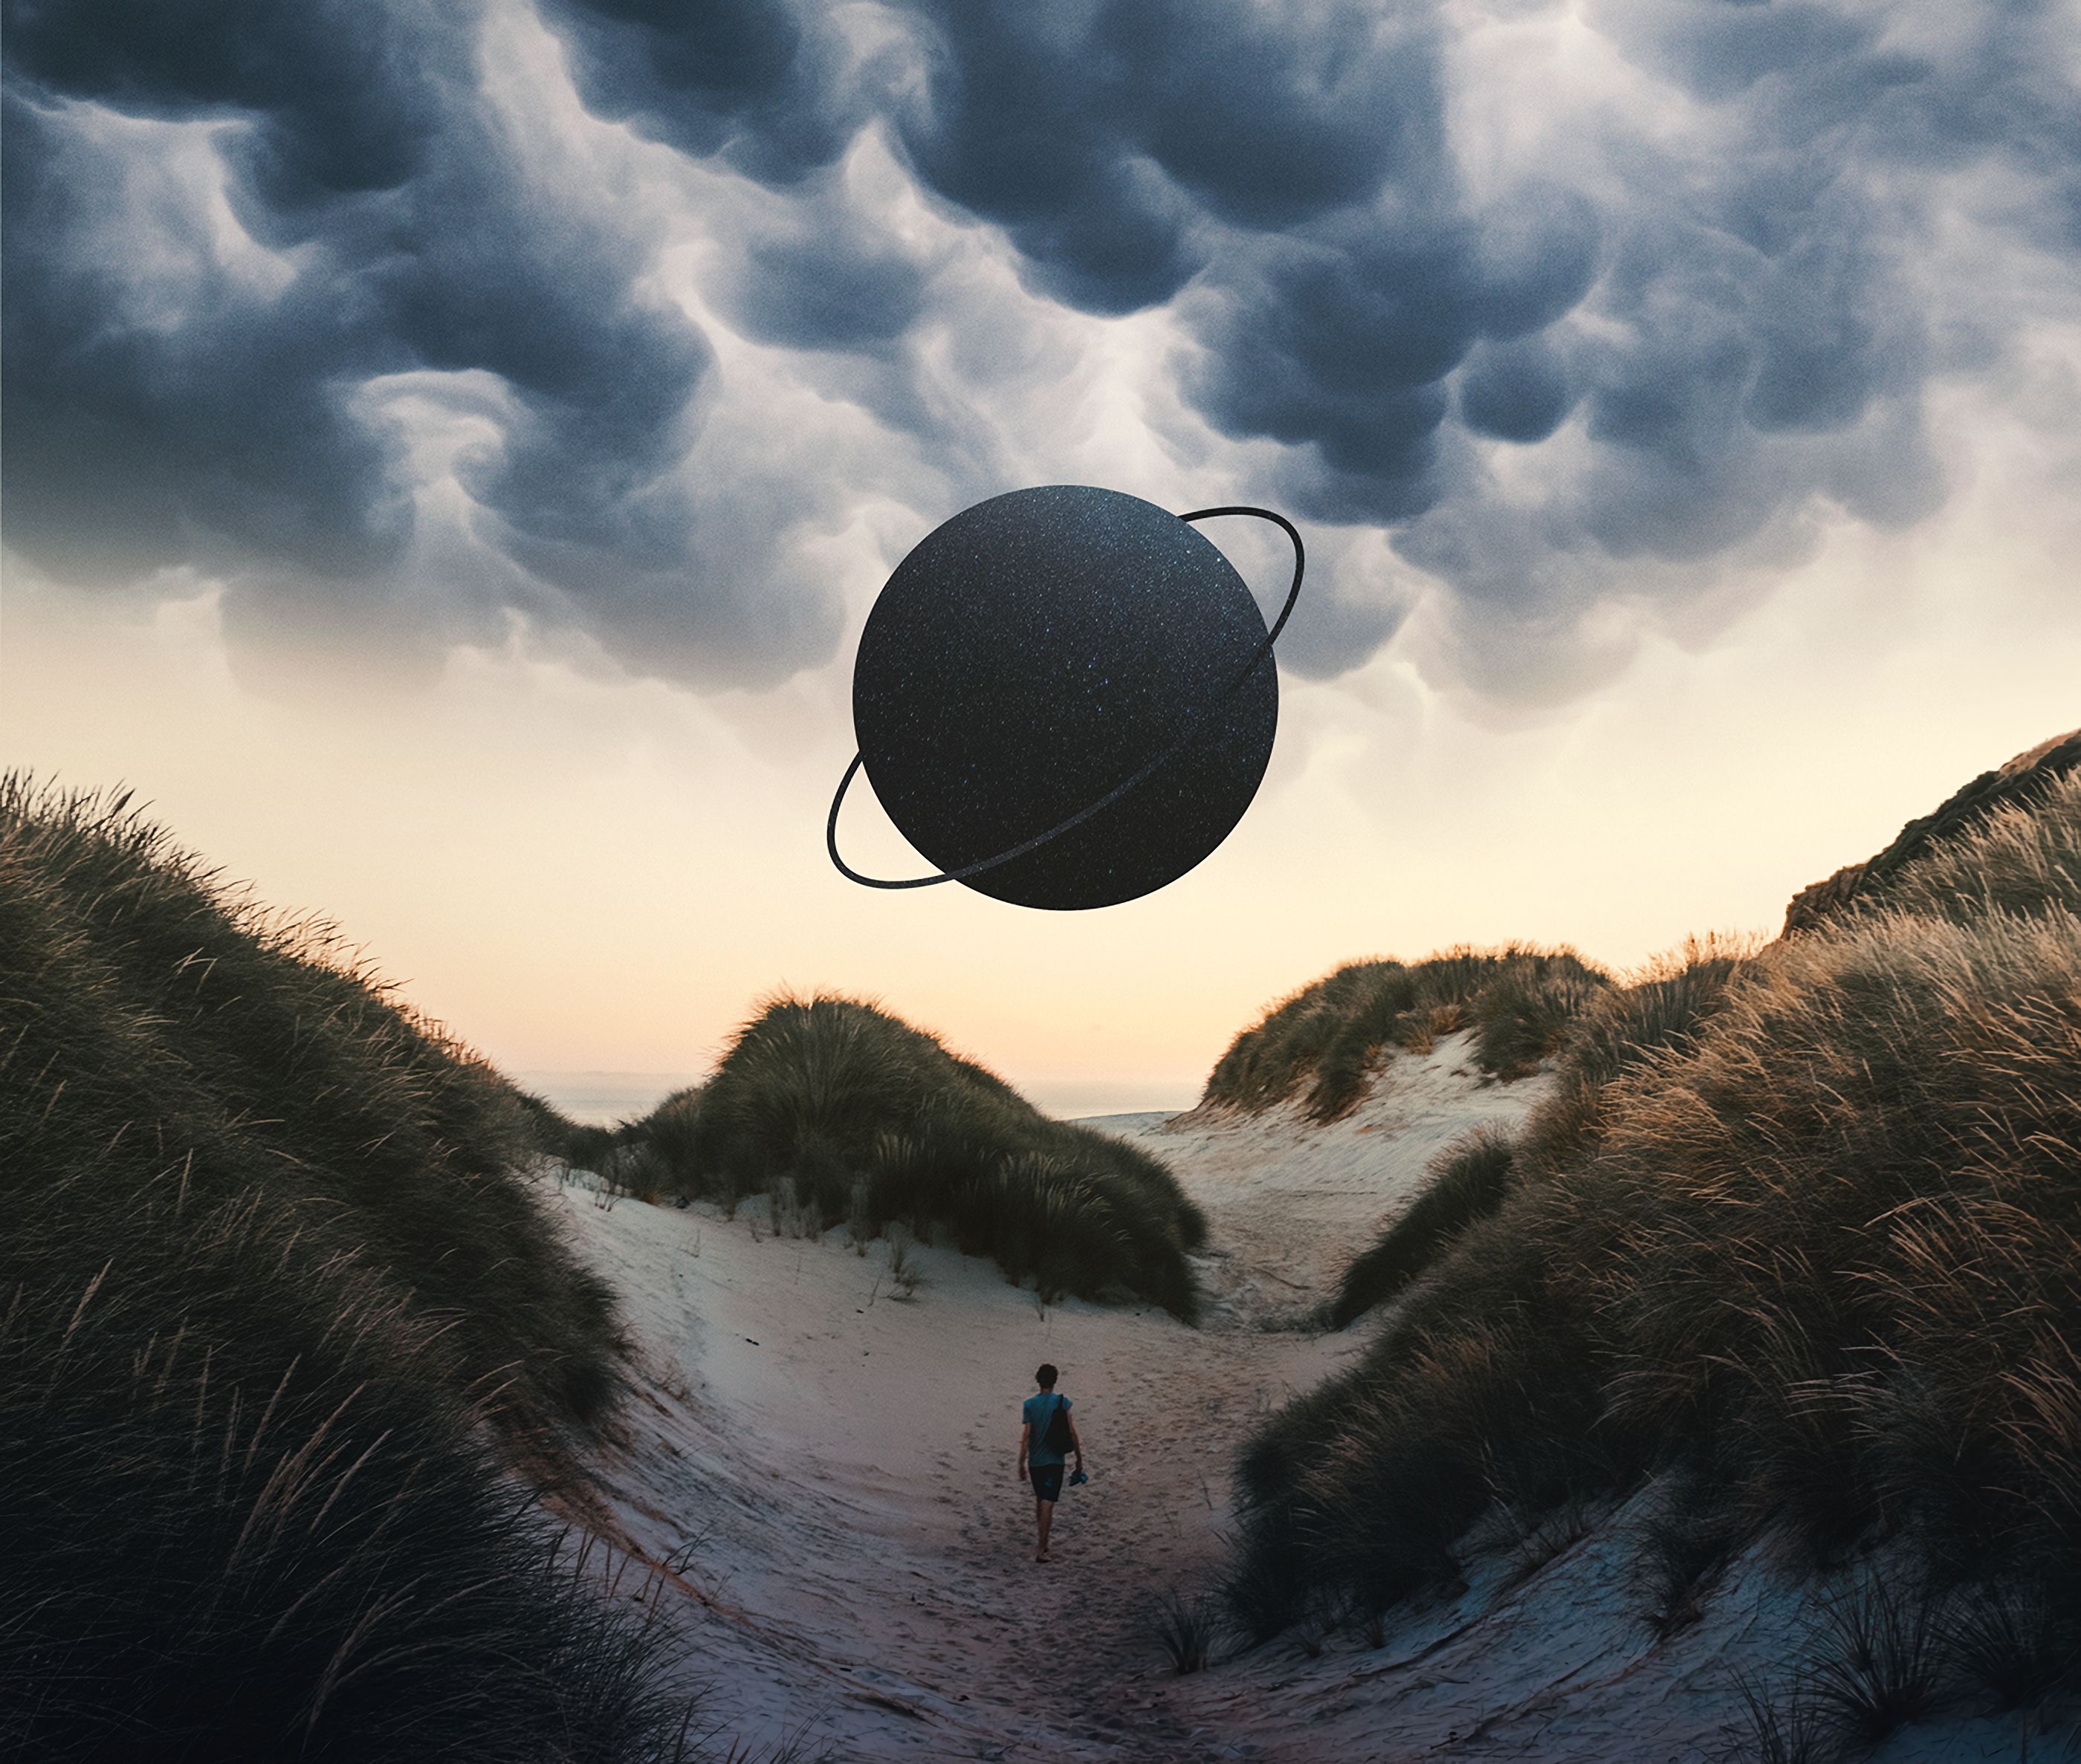 miscellanea, miscellaneous, planet, human, person, loneliness, photoshop, alone, lonely Full HD